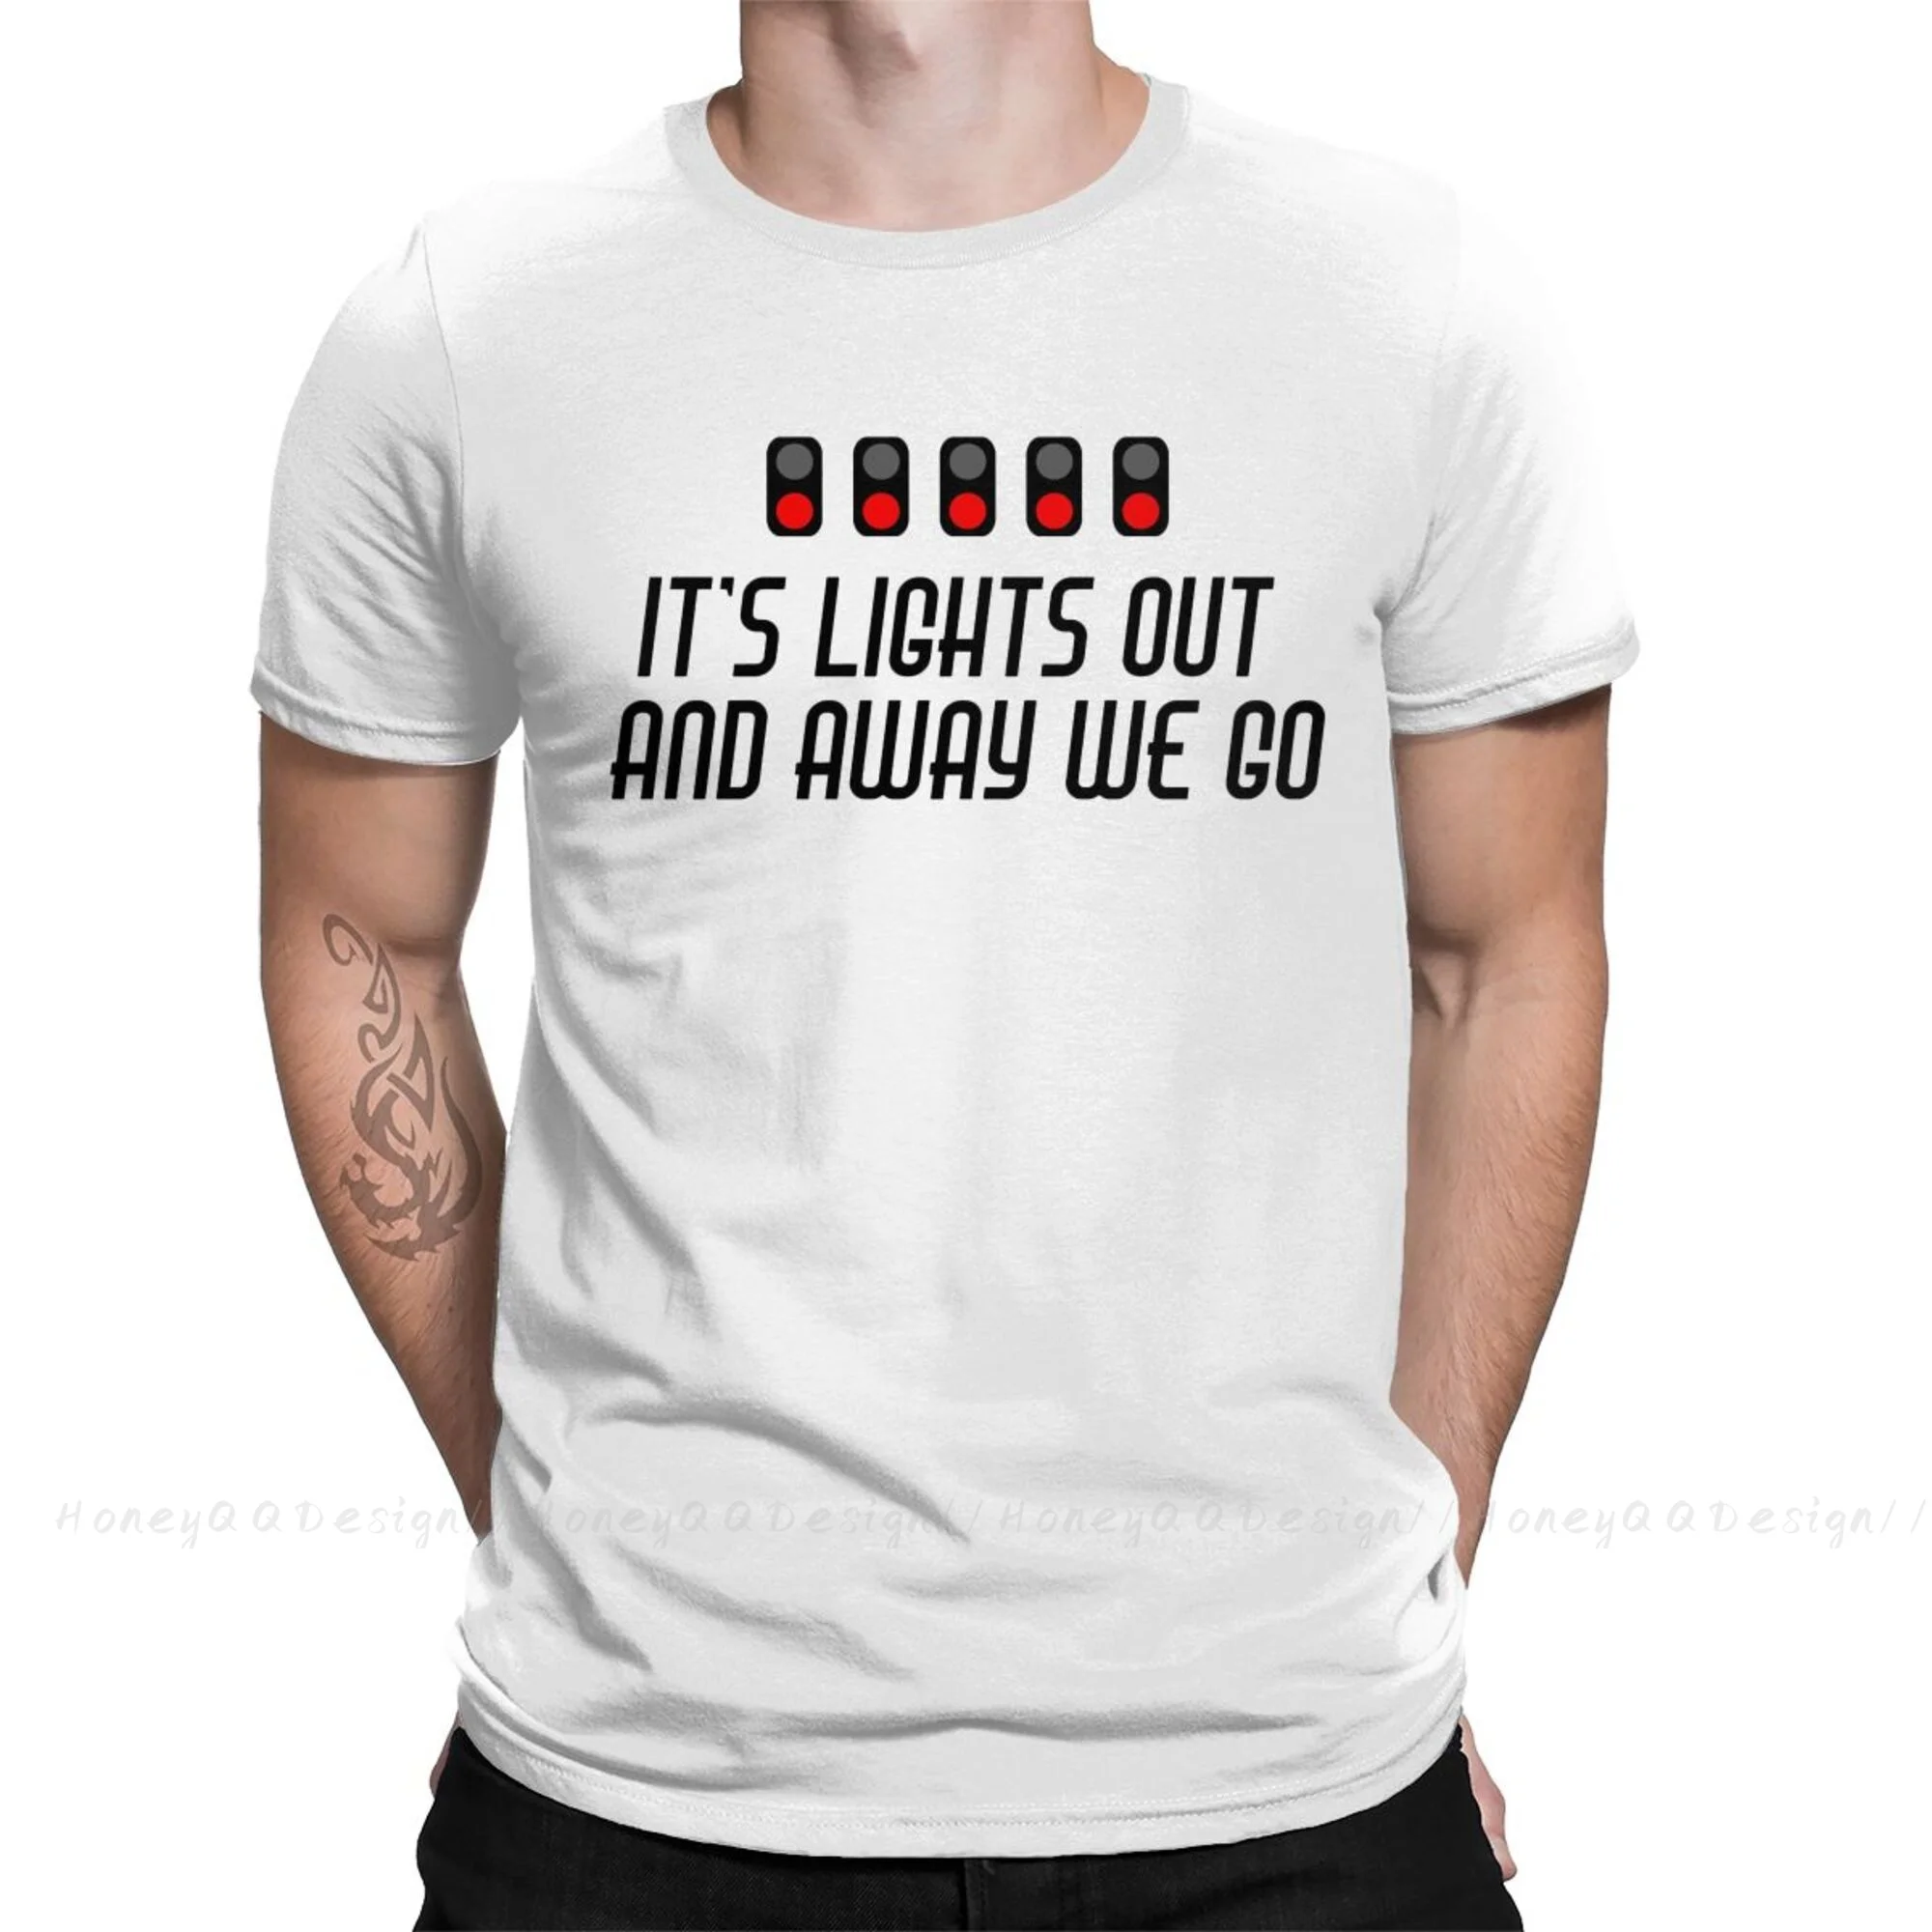 

Top Quality Clothing F1 Formula 1 T-Shirt For Men Unisex It's Lights Out And Away We Go 2 Shirt Fashion Short Sleeve Oversize